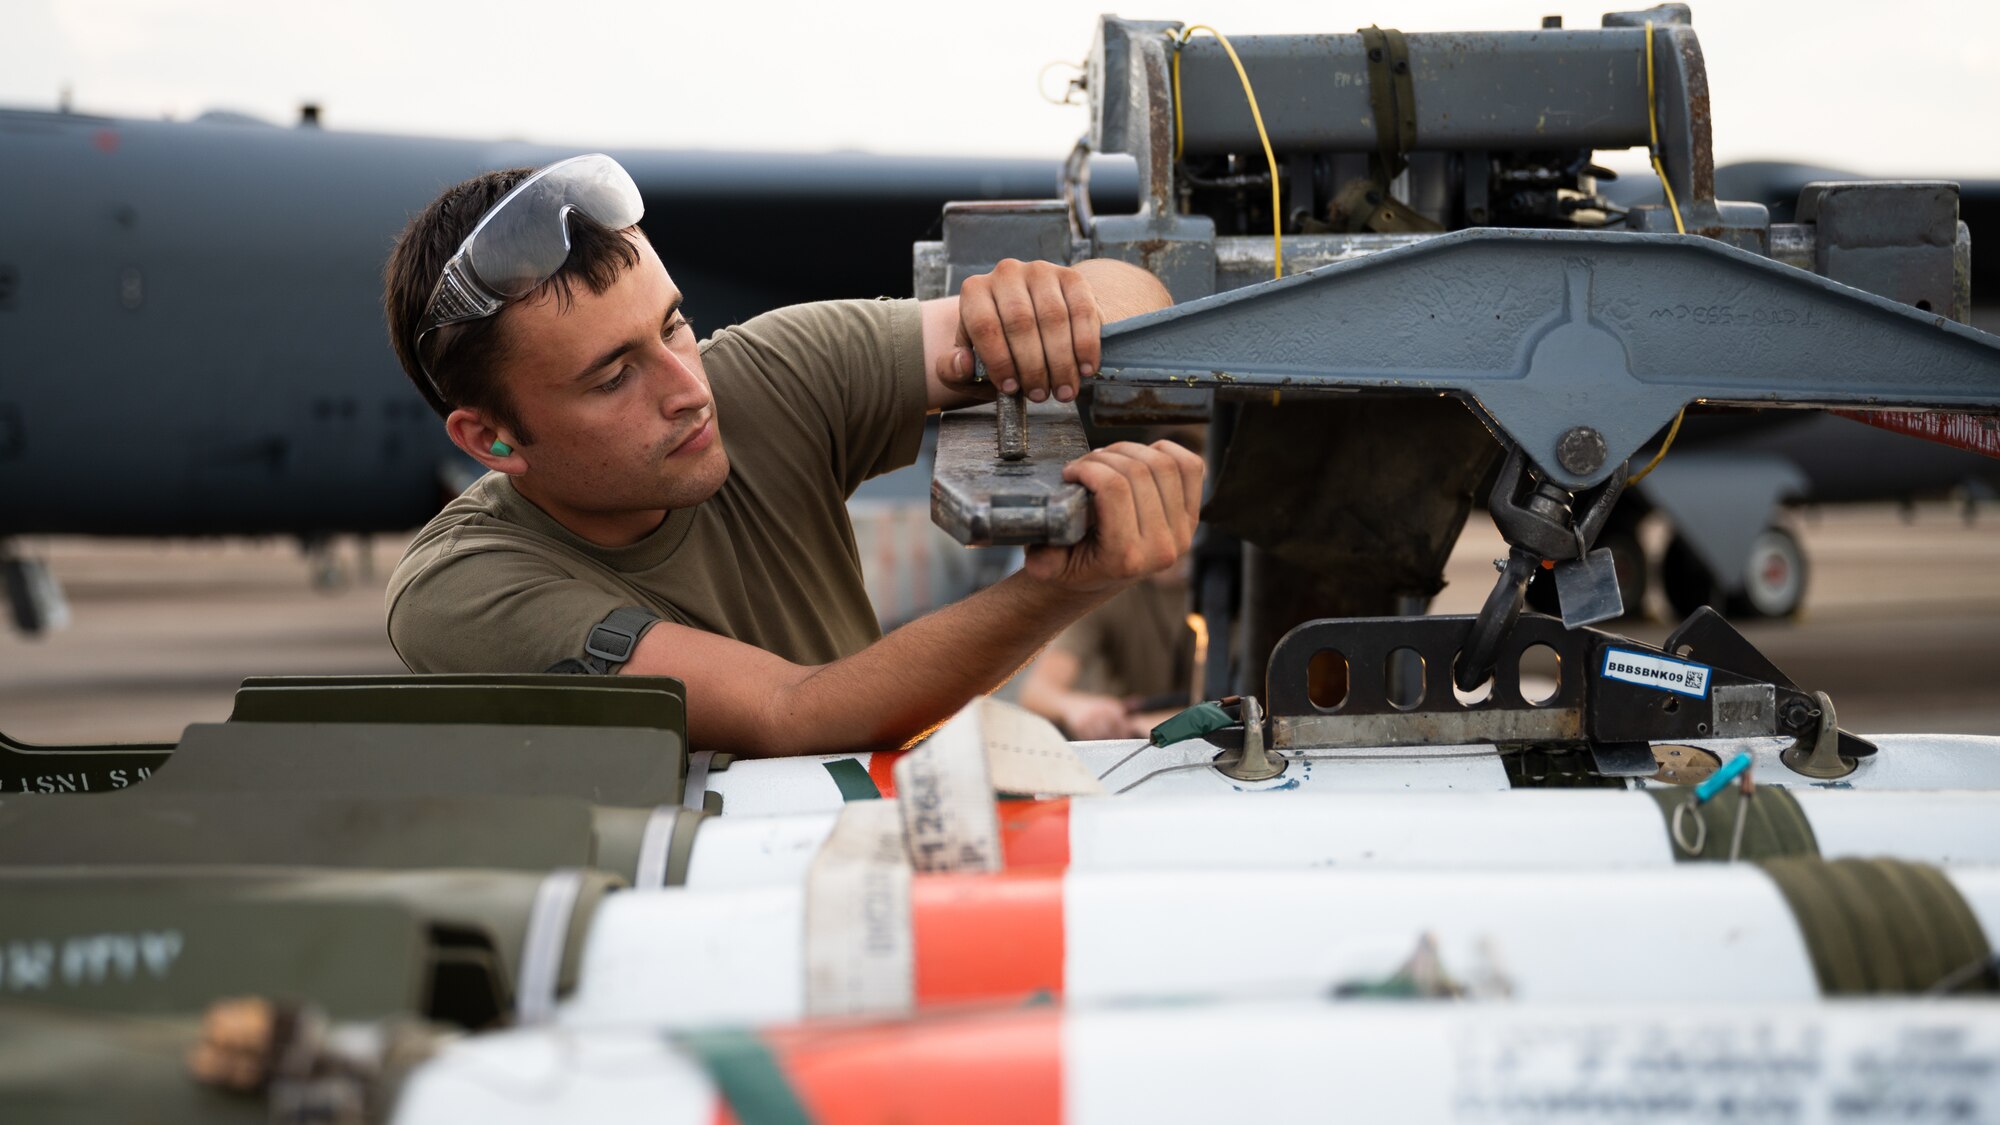 Senior Airman William Oskay, 2nd Aircraft Maintenance Squadron weapons load crew member, prepares to transfer a MK-62 Quickstrike naval mine in support of a Bomber Task Force deployment at Barksdale Air Force Base, Louisiana, Aug. 25, 2021. The MK-62 mine is a shallow water aircraft laid mine used primarily against surface and subsurface water craft. (U.S. Air Force photo by Senior Airman Jacob B. Wrightsman)